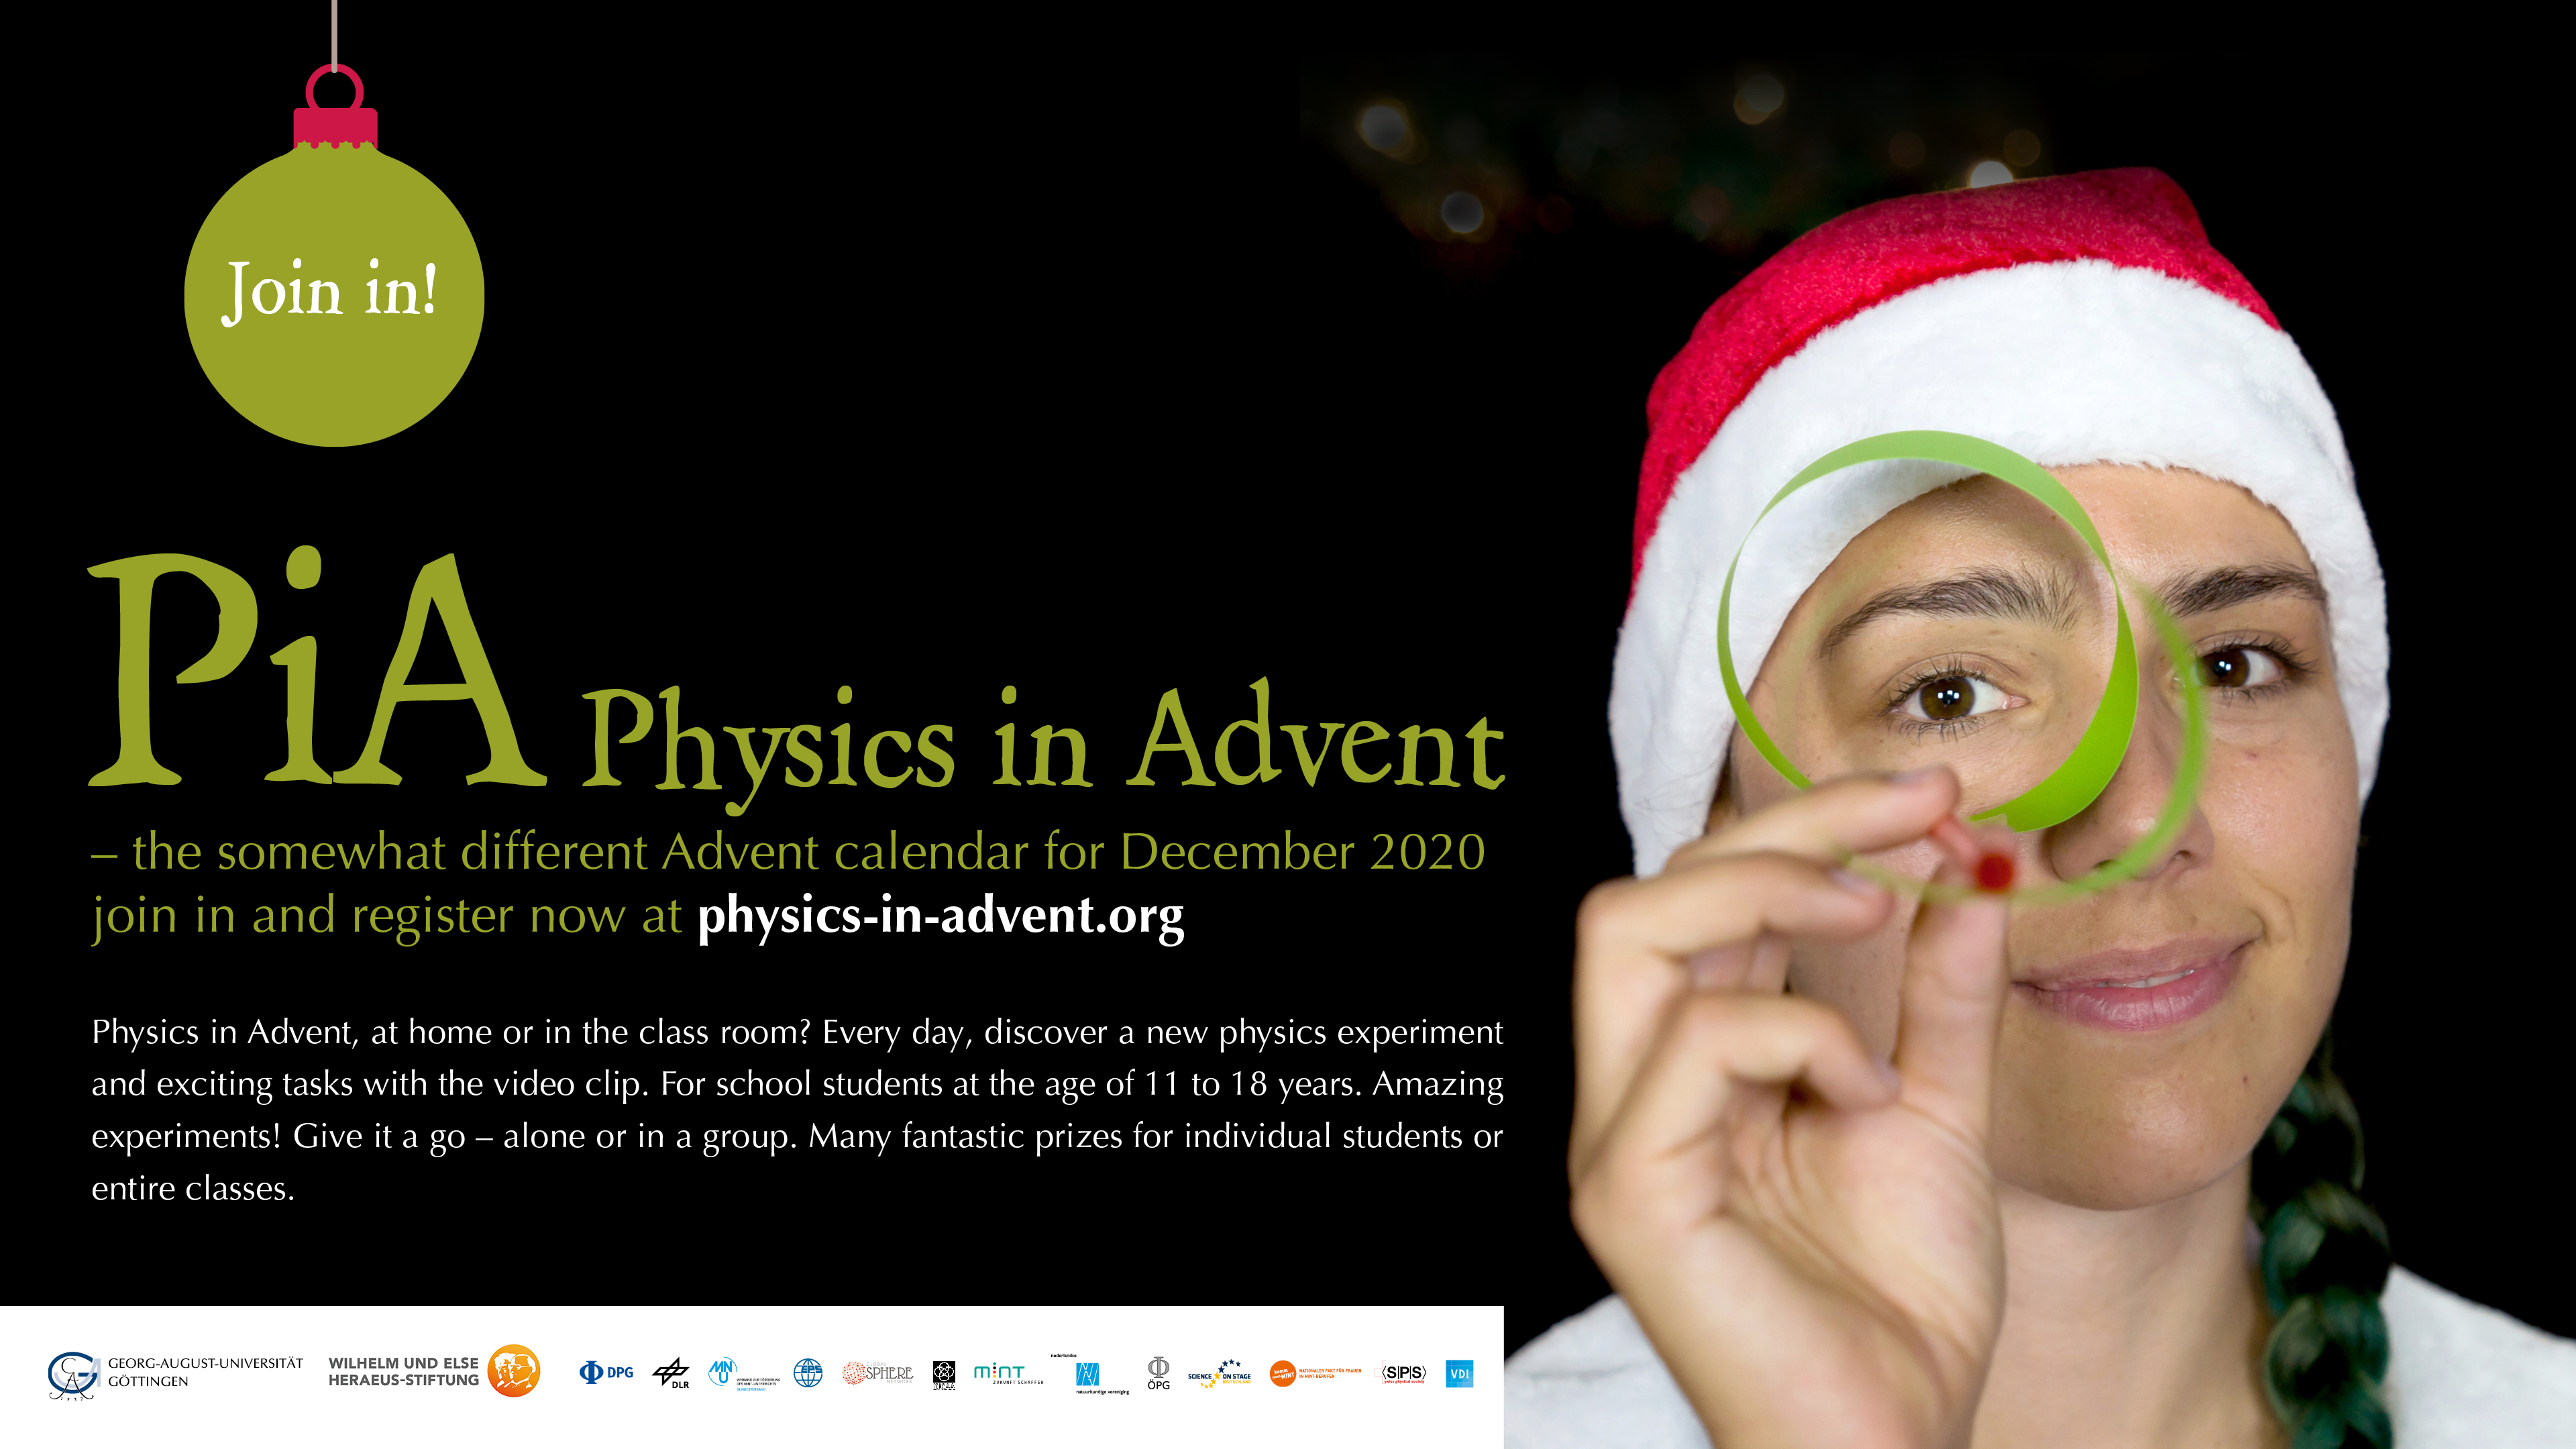 "Physics in Advent"